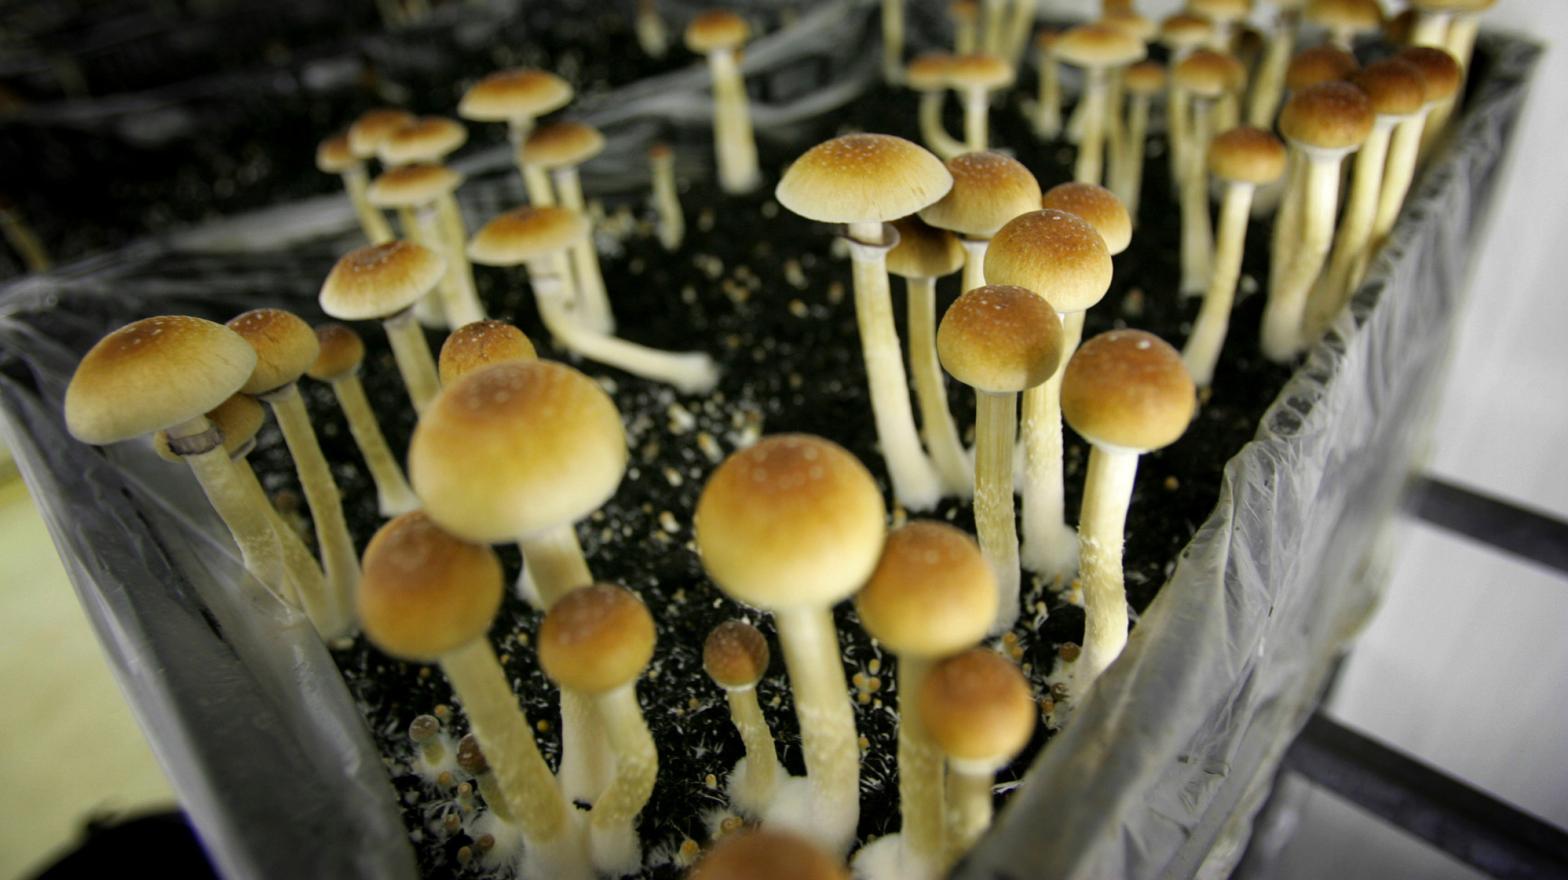 Psilocybin mushrooms in a grow room at the Procare farm in Hazerswoude, central Netherlands. (Photo: Peter Dejong, AP)